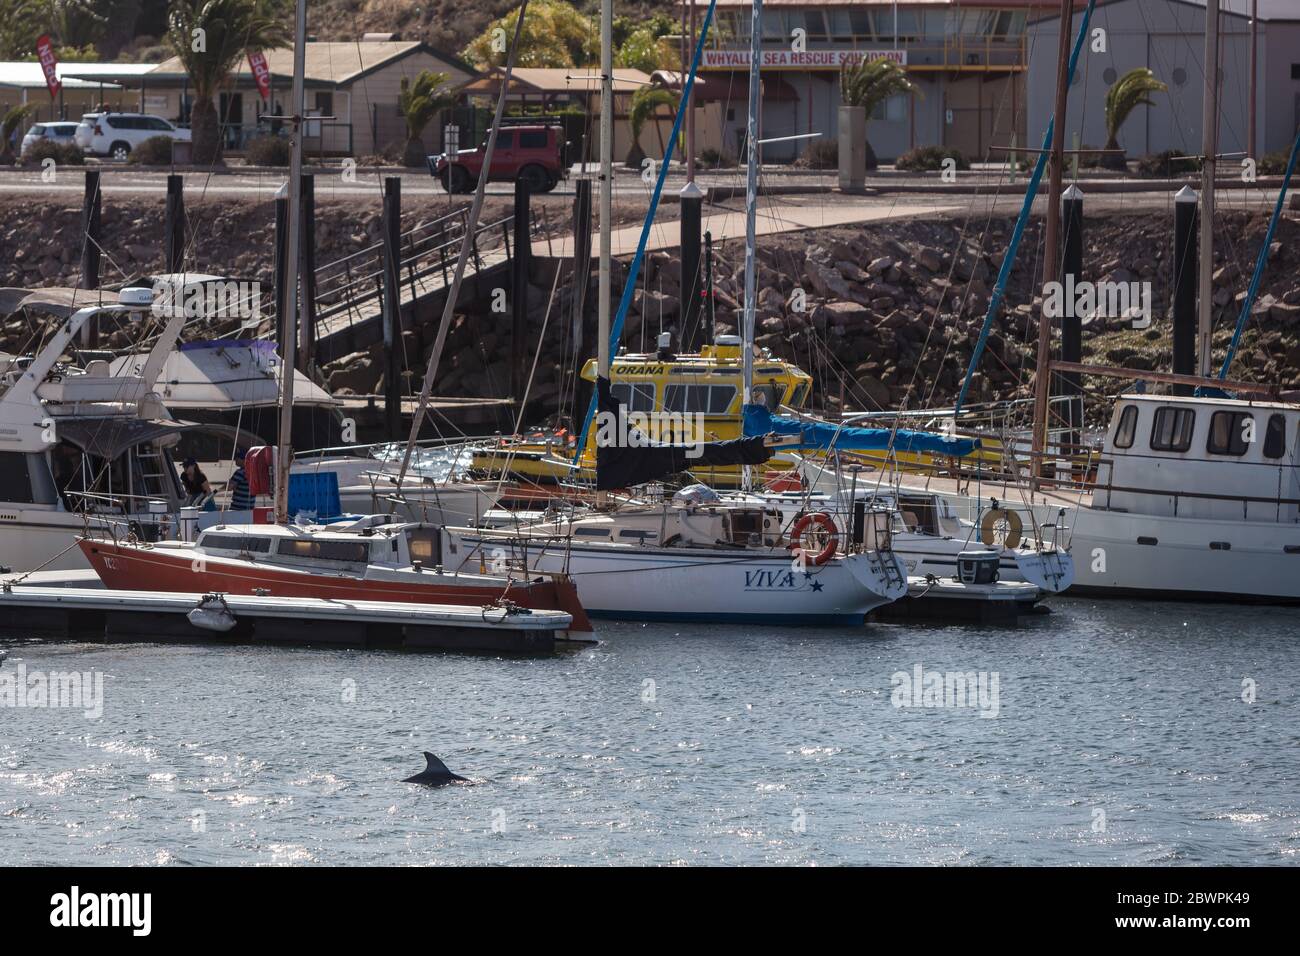 Whyalla South Australia November 17th 2019 : A wild dolphin swimming in the marina at Whyalla in South Australia Stock Photo